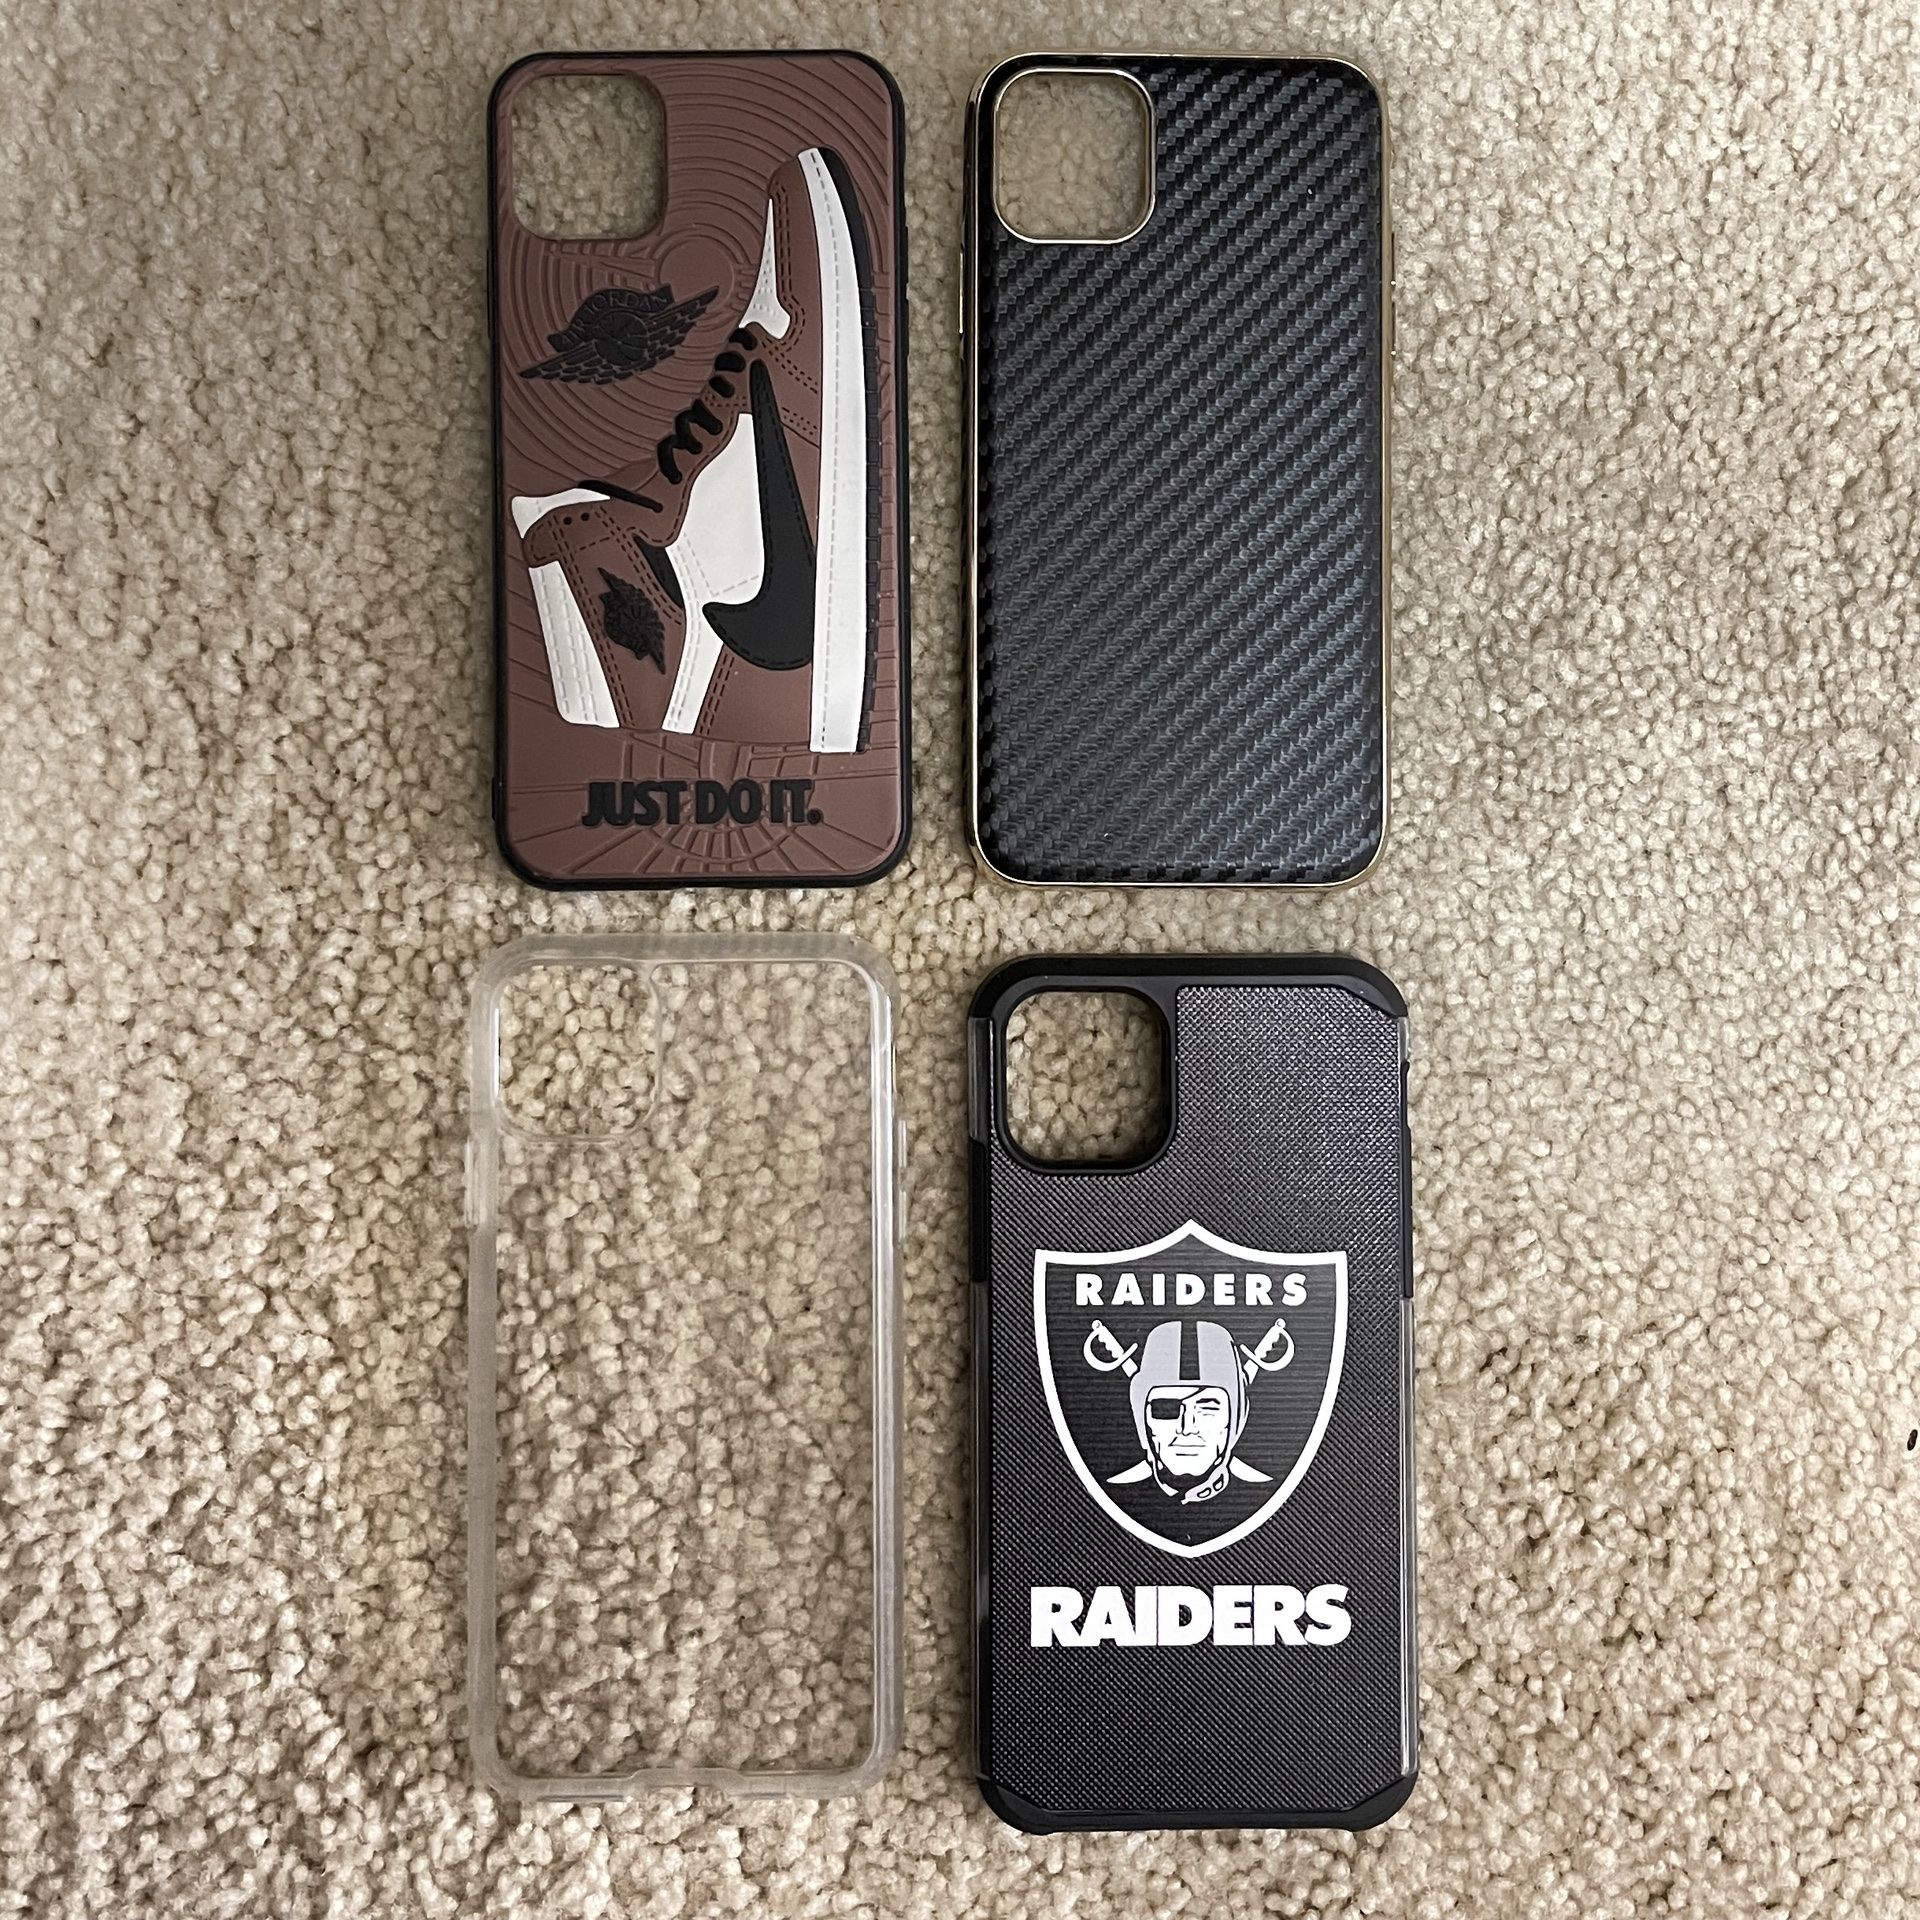 Bundle Of 4 iPhone 11 Pro Max Cases! Perfect Condition! Pick Up In Elk Grove